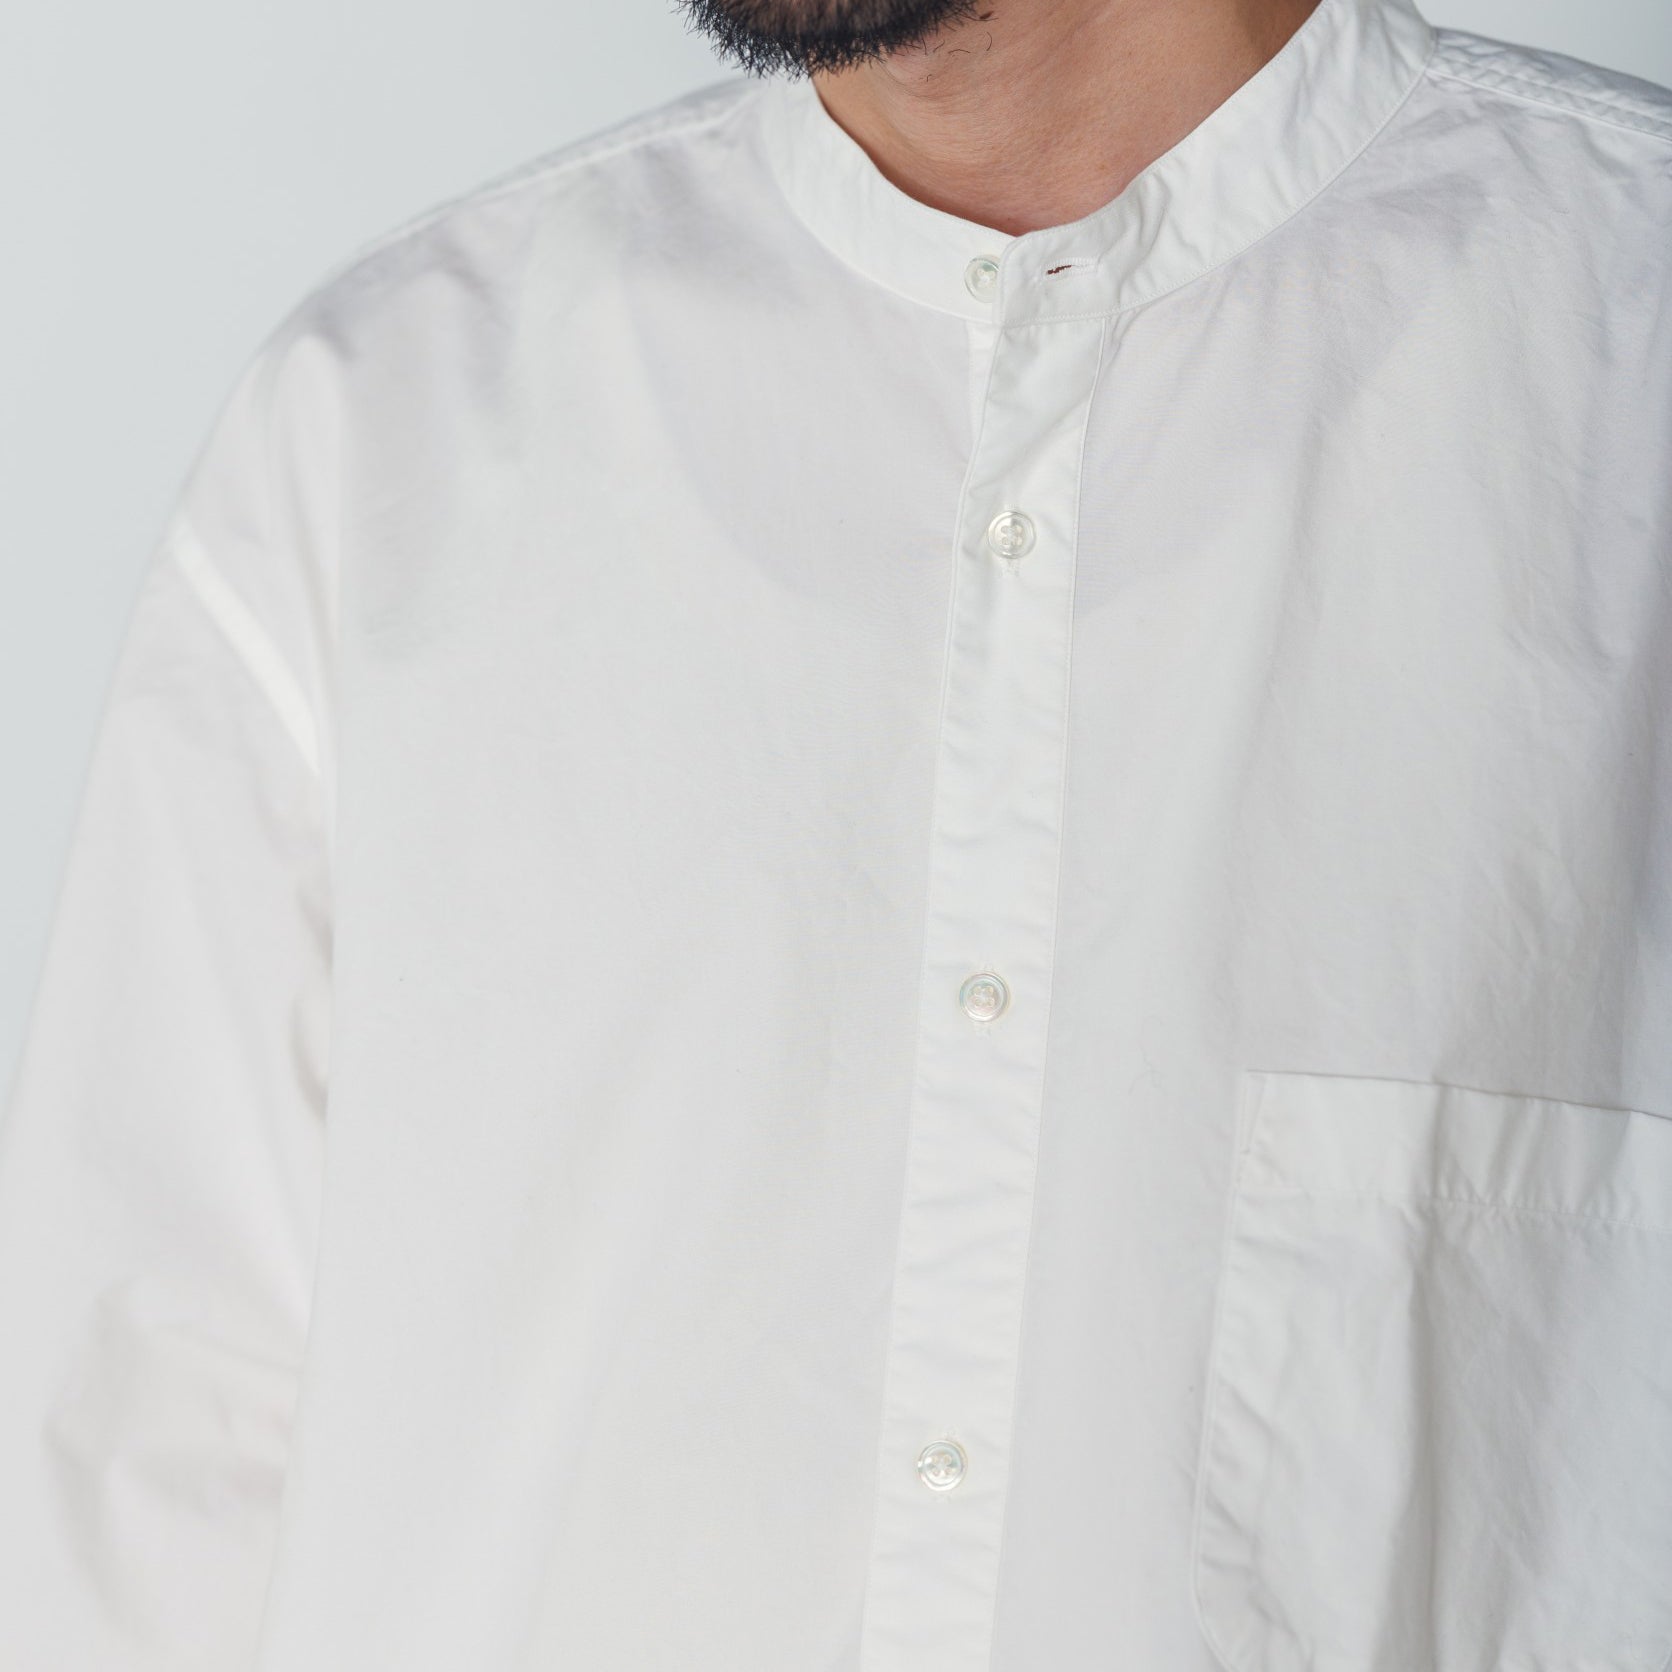 No:FPO-02　_WHITE | Name:FAKE PULLOVER  SHIRT-BROAD | Color:White【CATTA_カッタ】【入荷予定アイテム・入荷連絡可能】